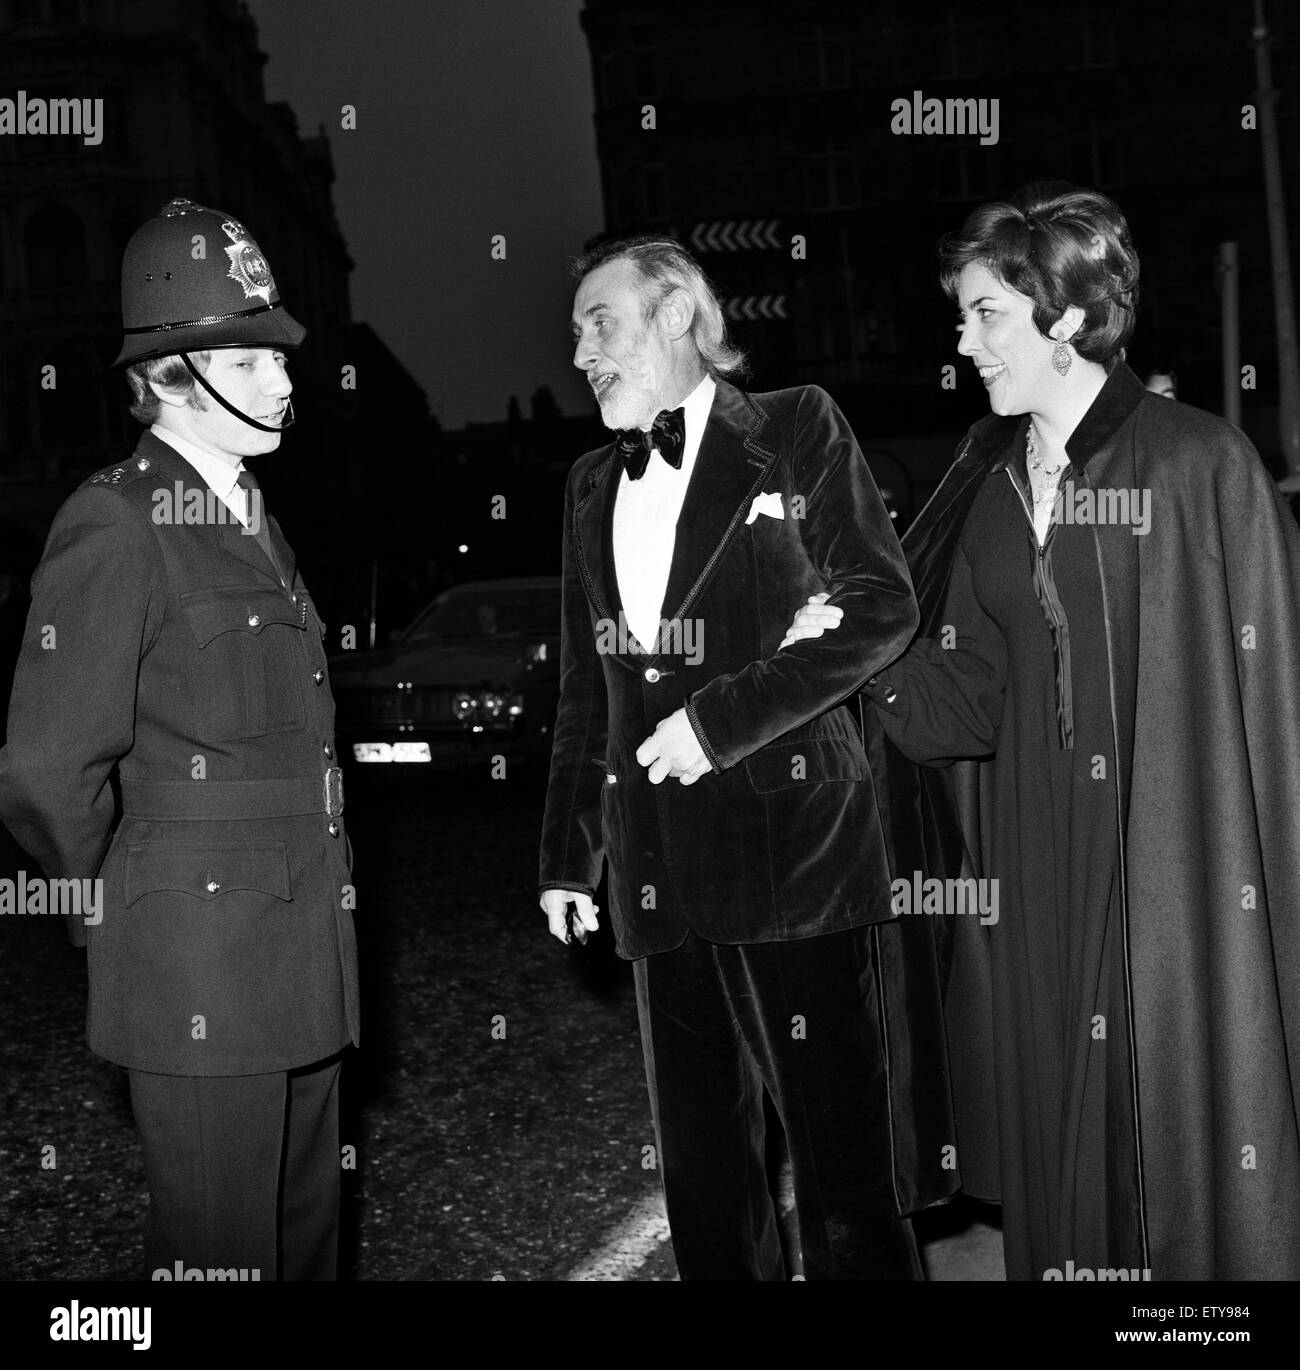 The Royal Film Performance of 'The Three musketeers' at the Odeon Leicester Square, London. Spike Milligan with his wife Paddy Milligan, talking to a policeman. 25th March 1974. Stock Photo